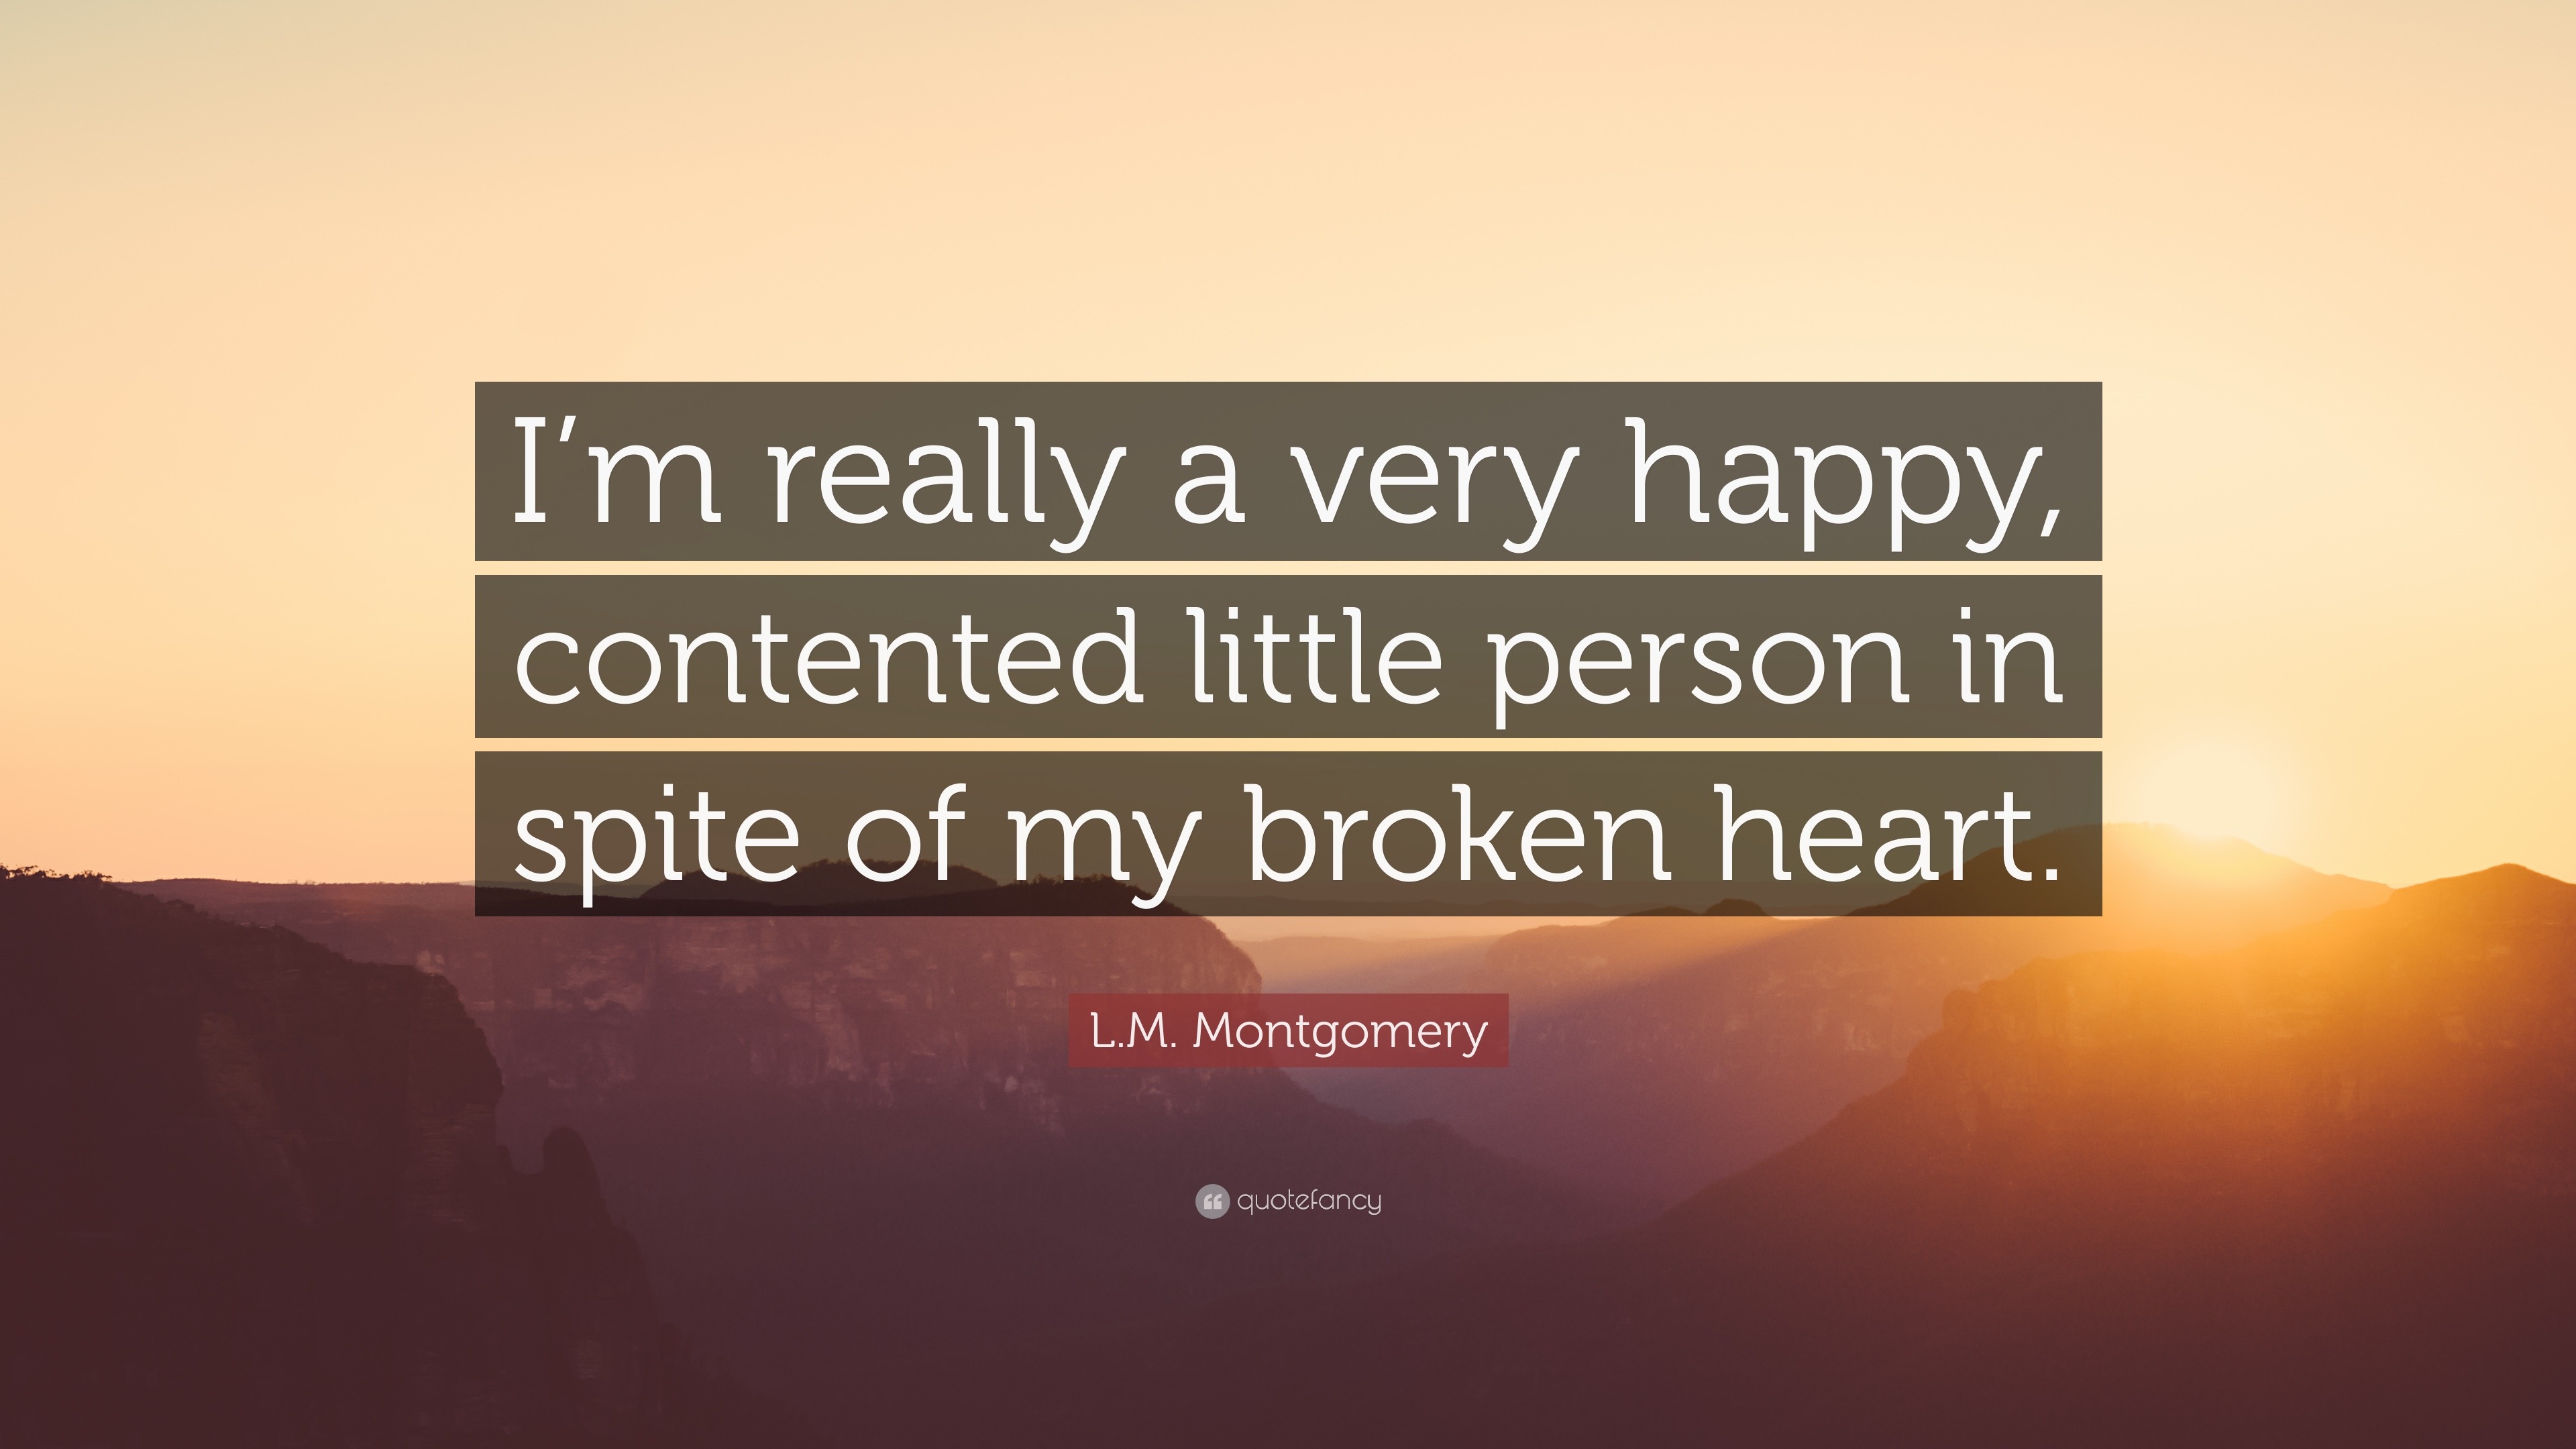 L M Montgomery Quote “I m really a very happy contented little person